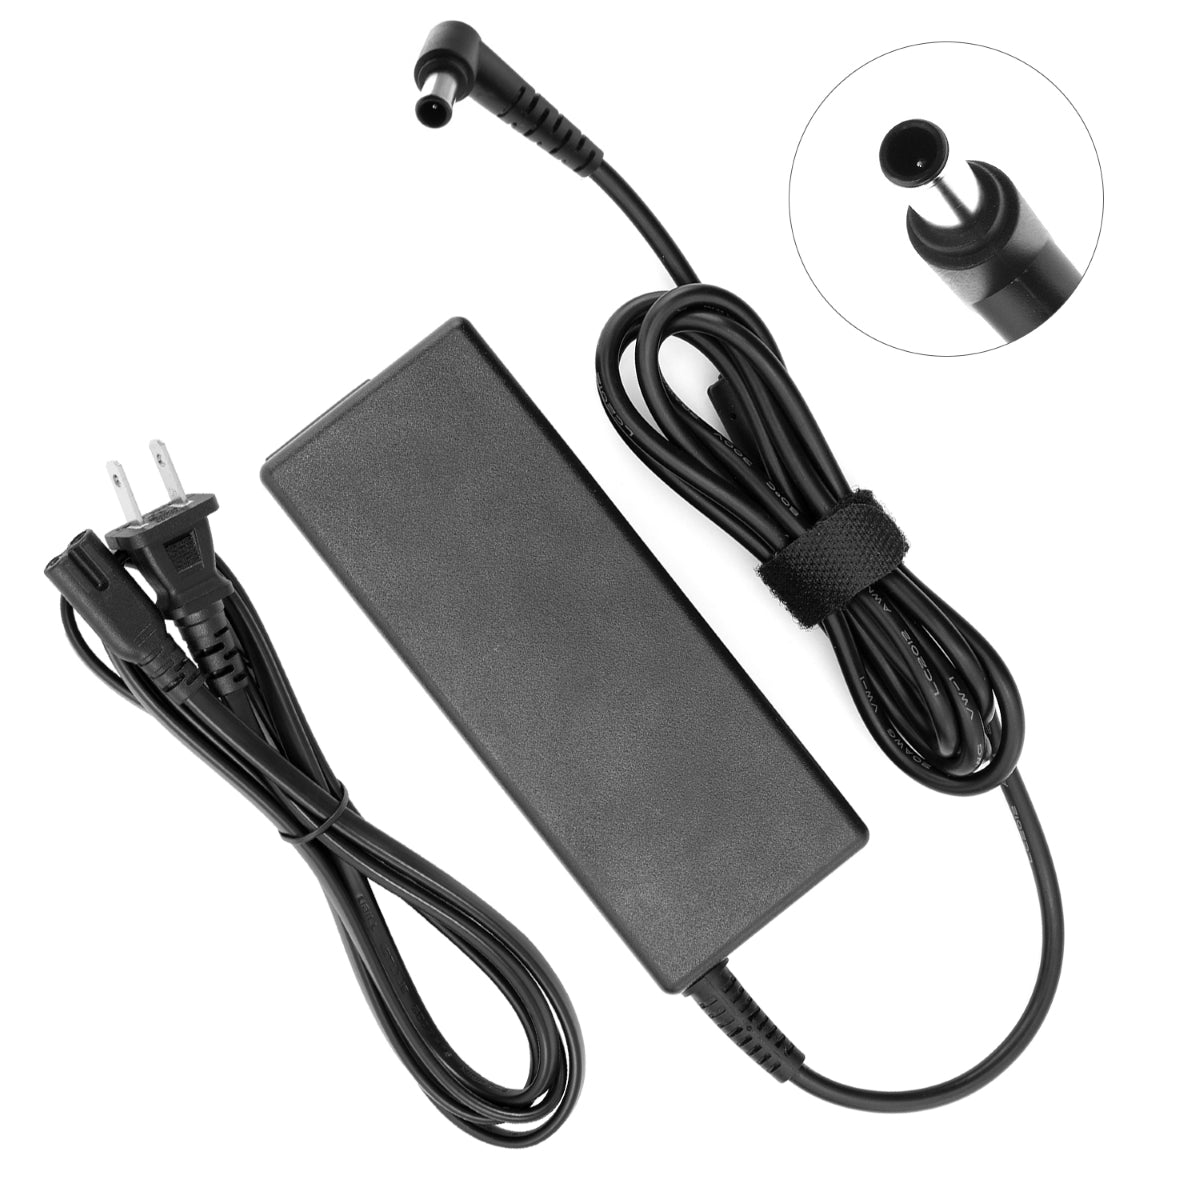 AC Adapter for LG 20EN33S Monitor